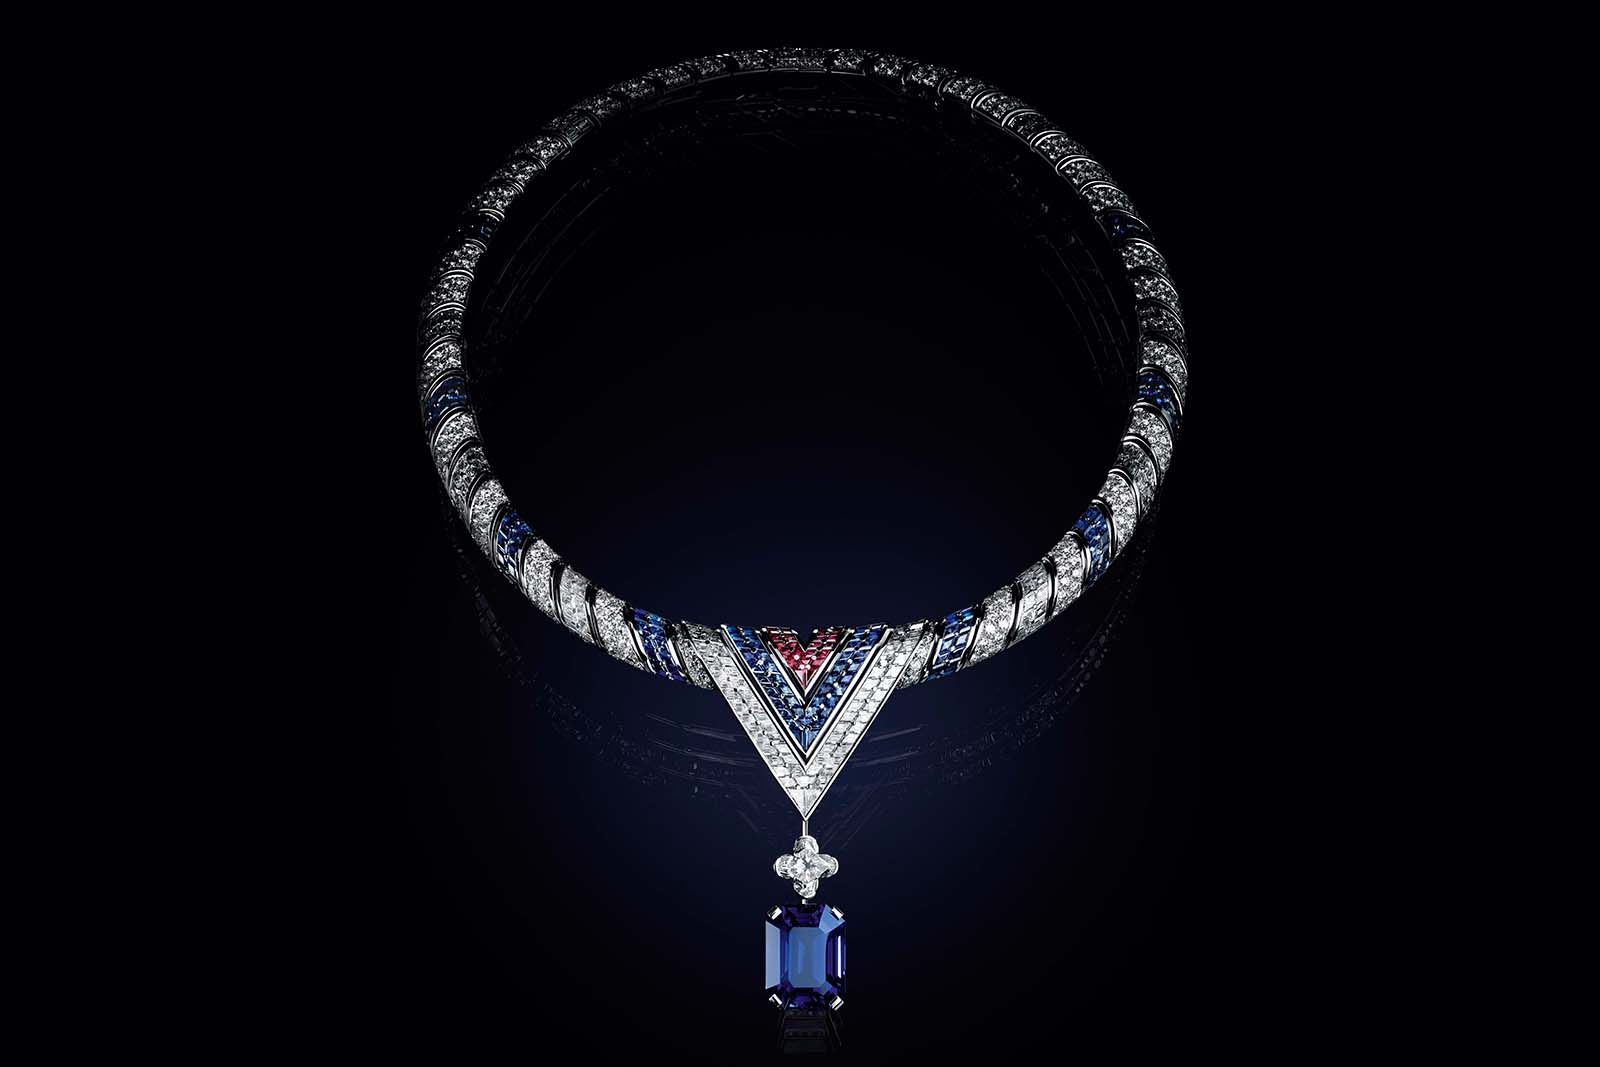 With Greece event, Louis Vuitton affirms high jewellery ambitions